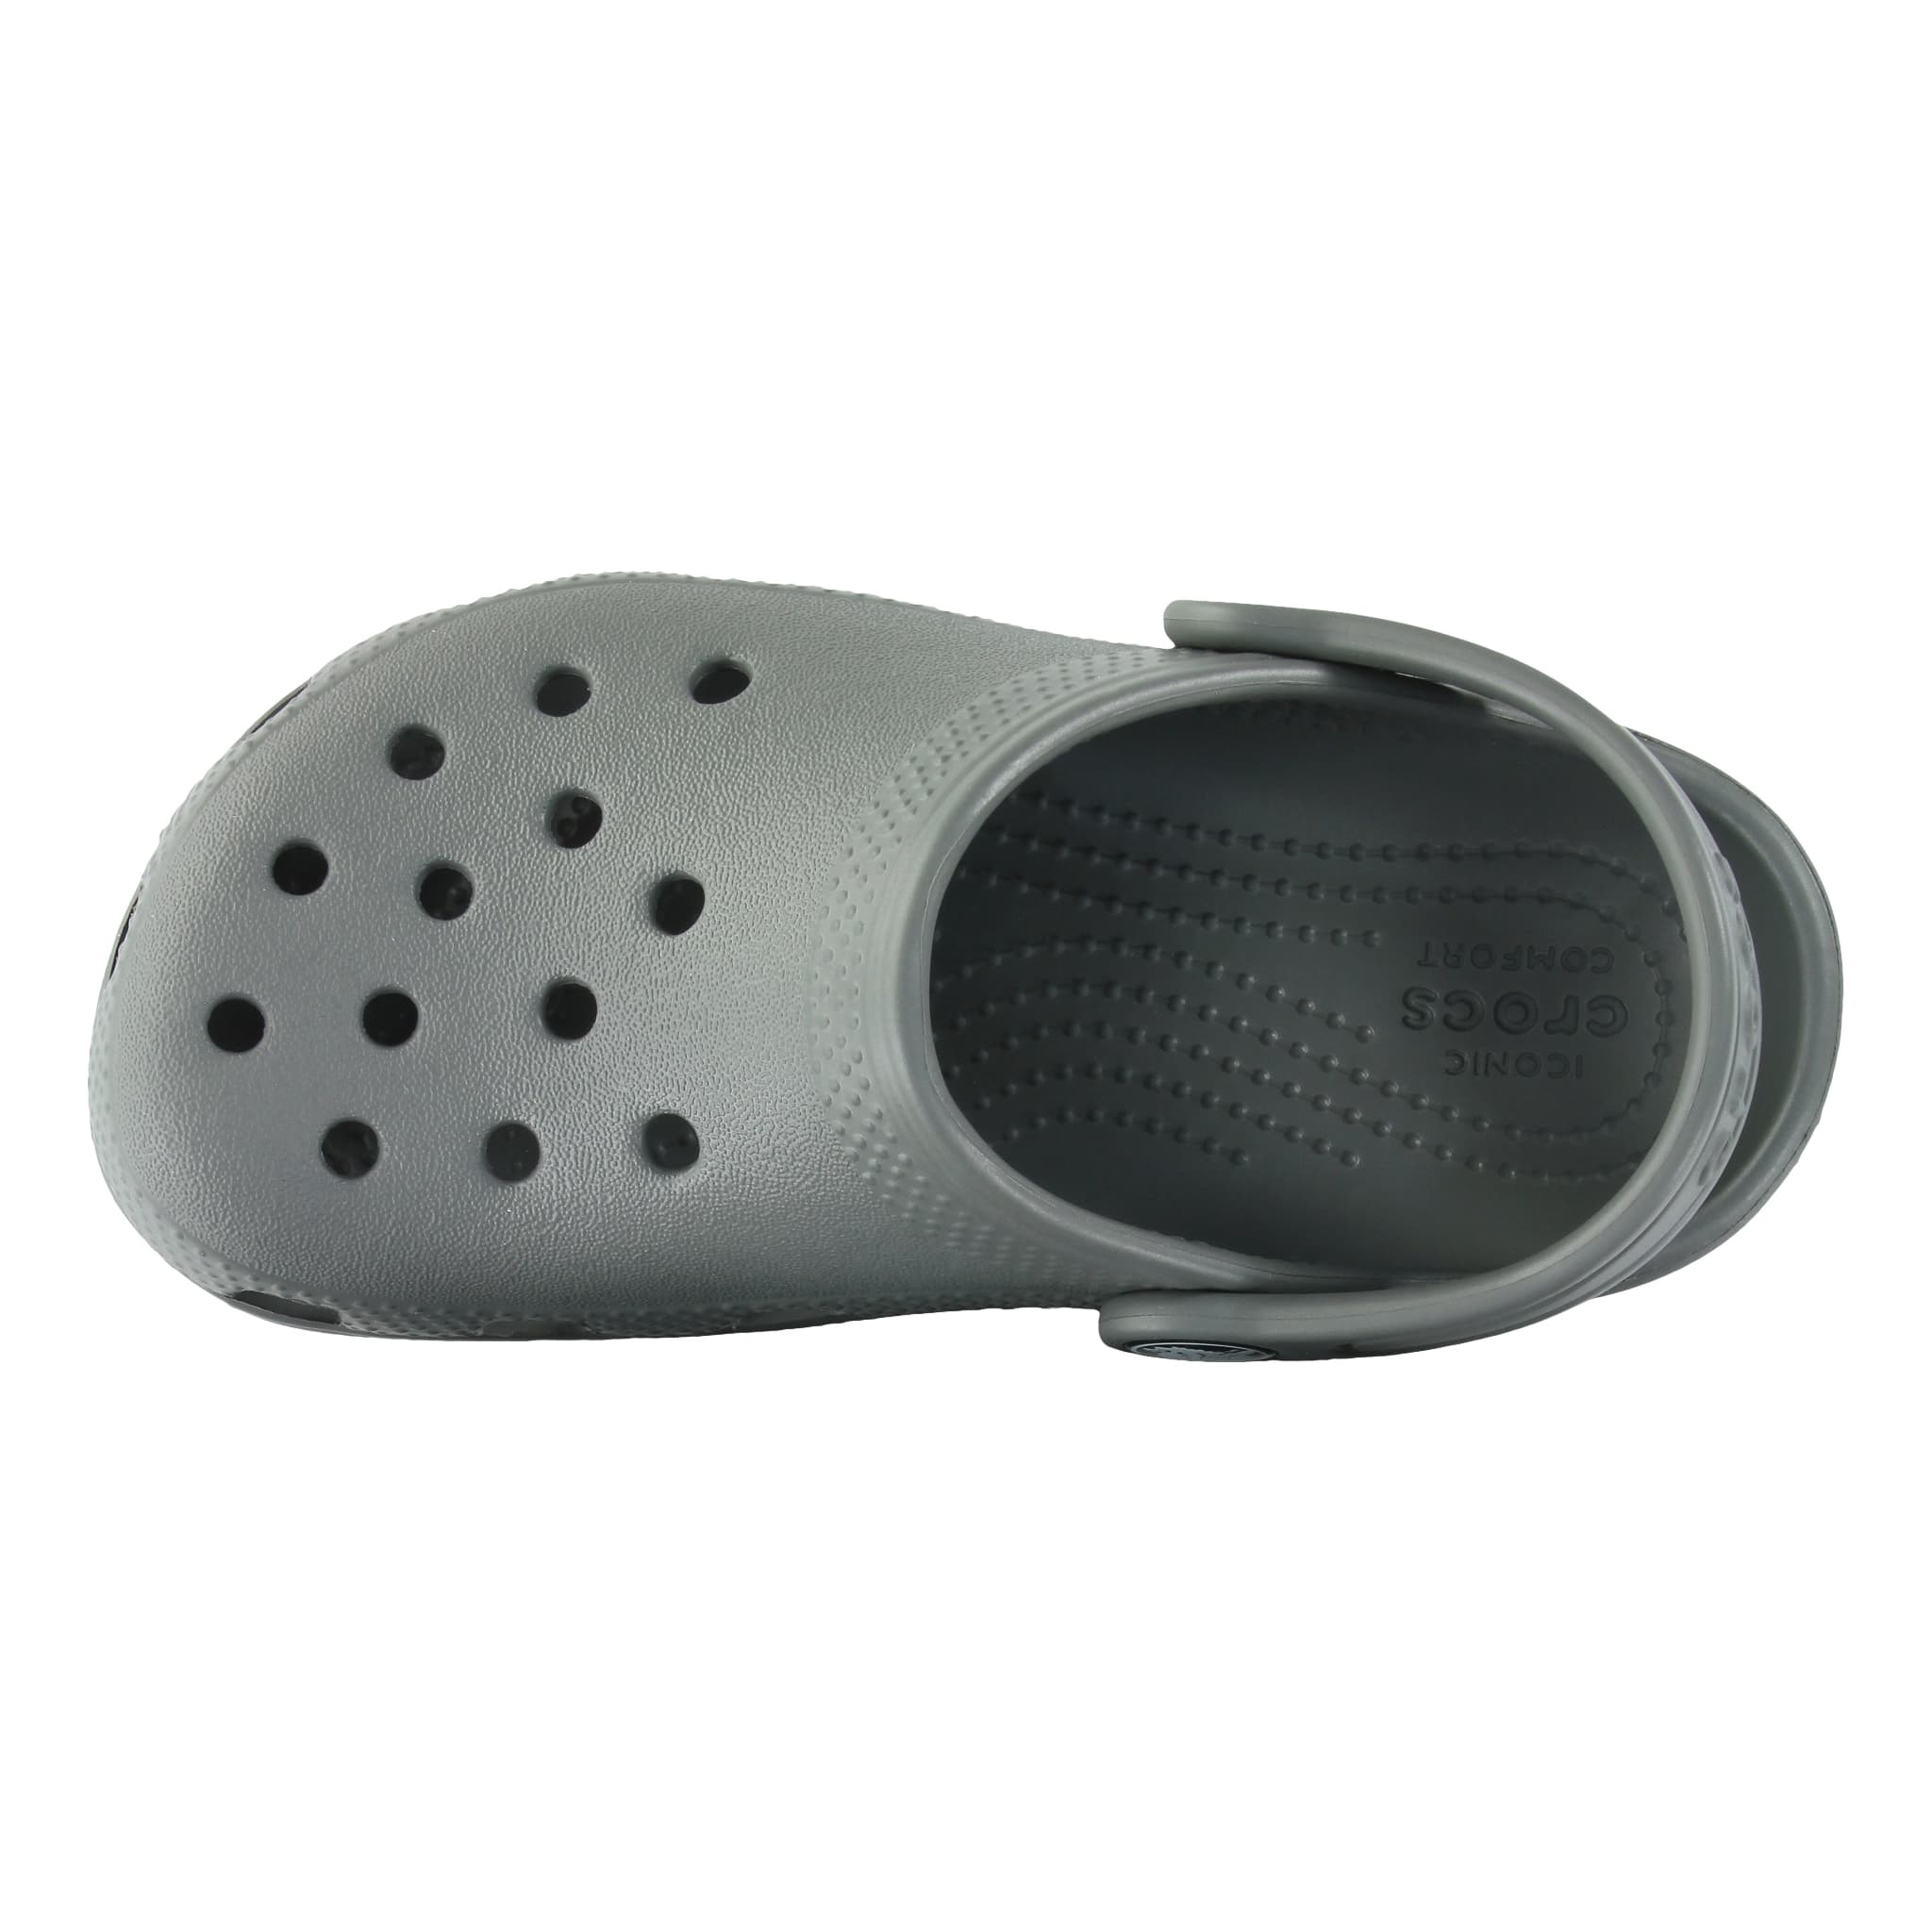 The Crocs™ Youth Classic Clog - top